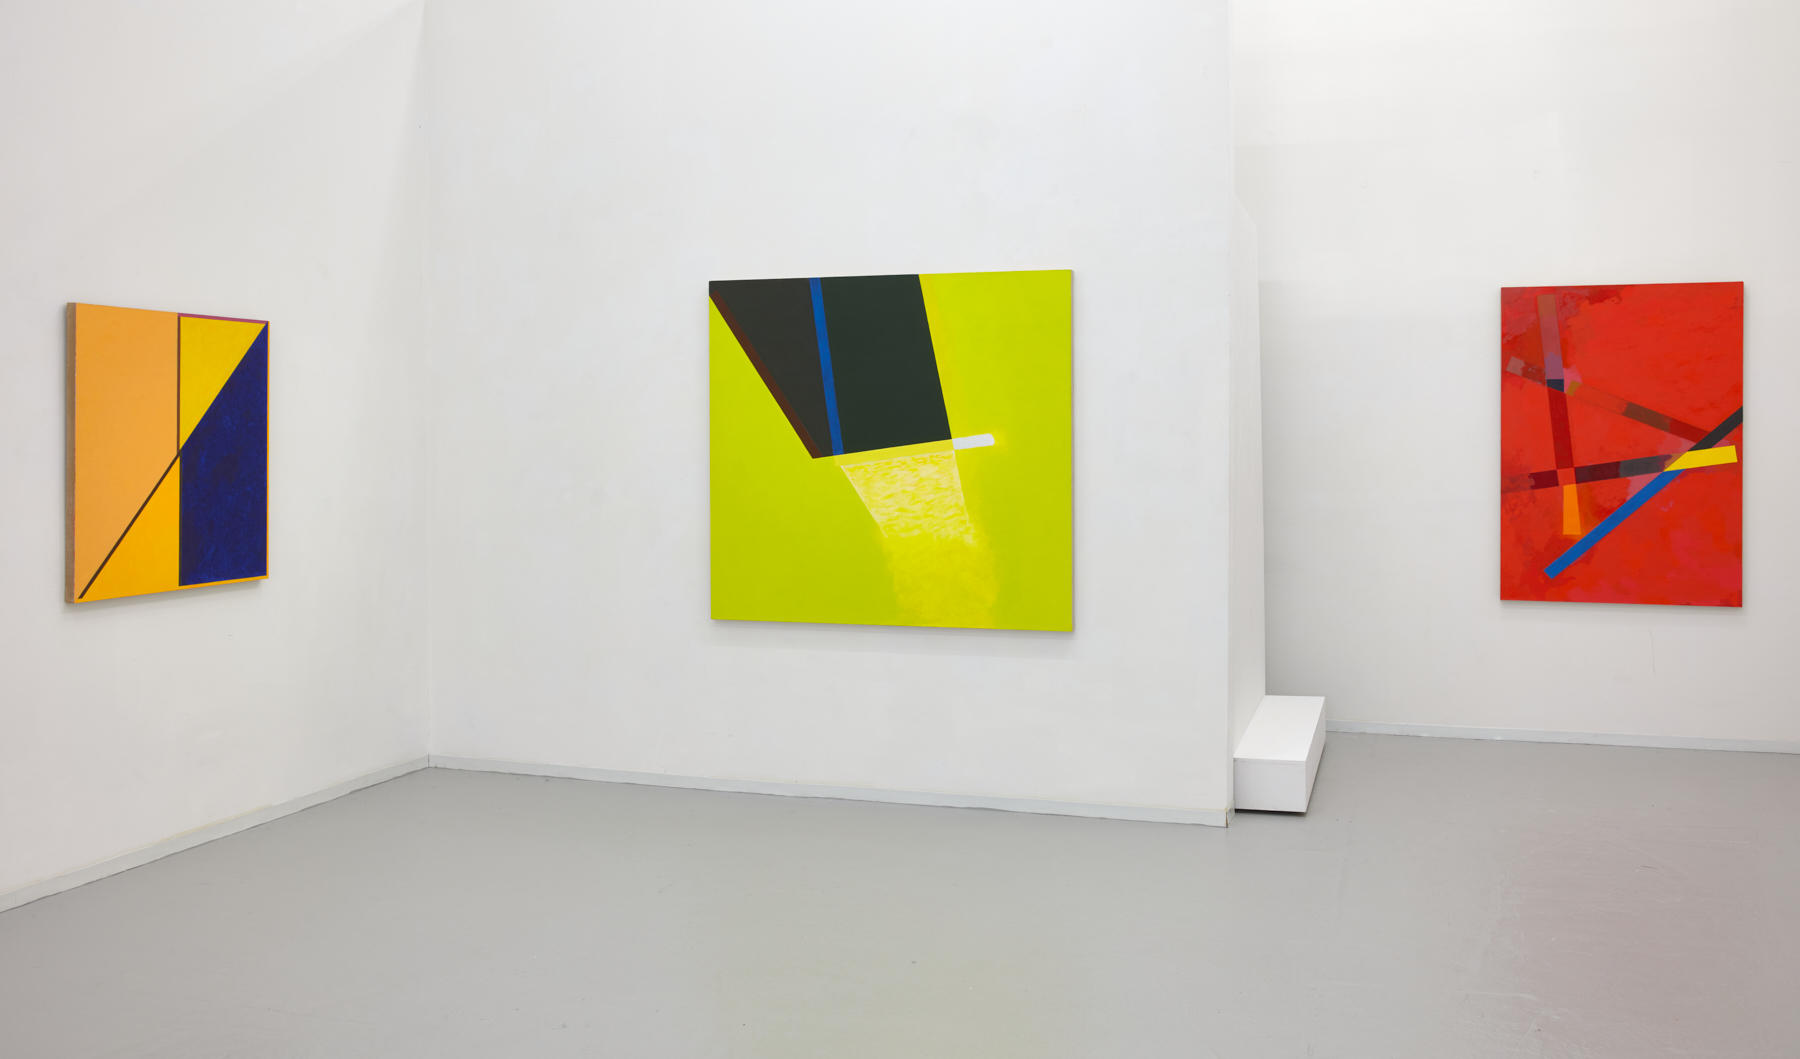 Jeremy Gilbert-Rolfe

David Richard Gallery - Chelsea

Jeremy Gilbert-Rolfe
Paintings from 2009 to 2022